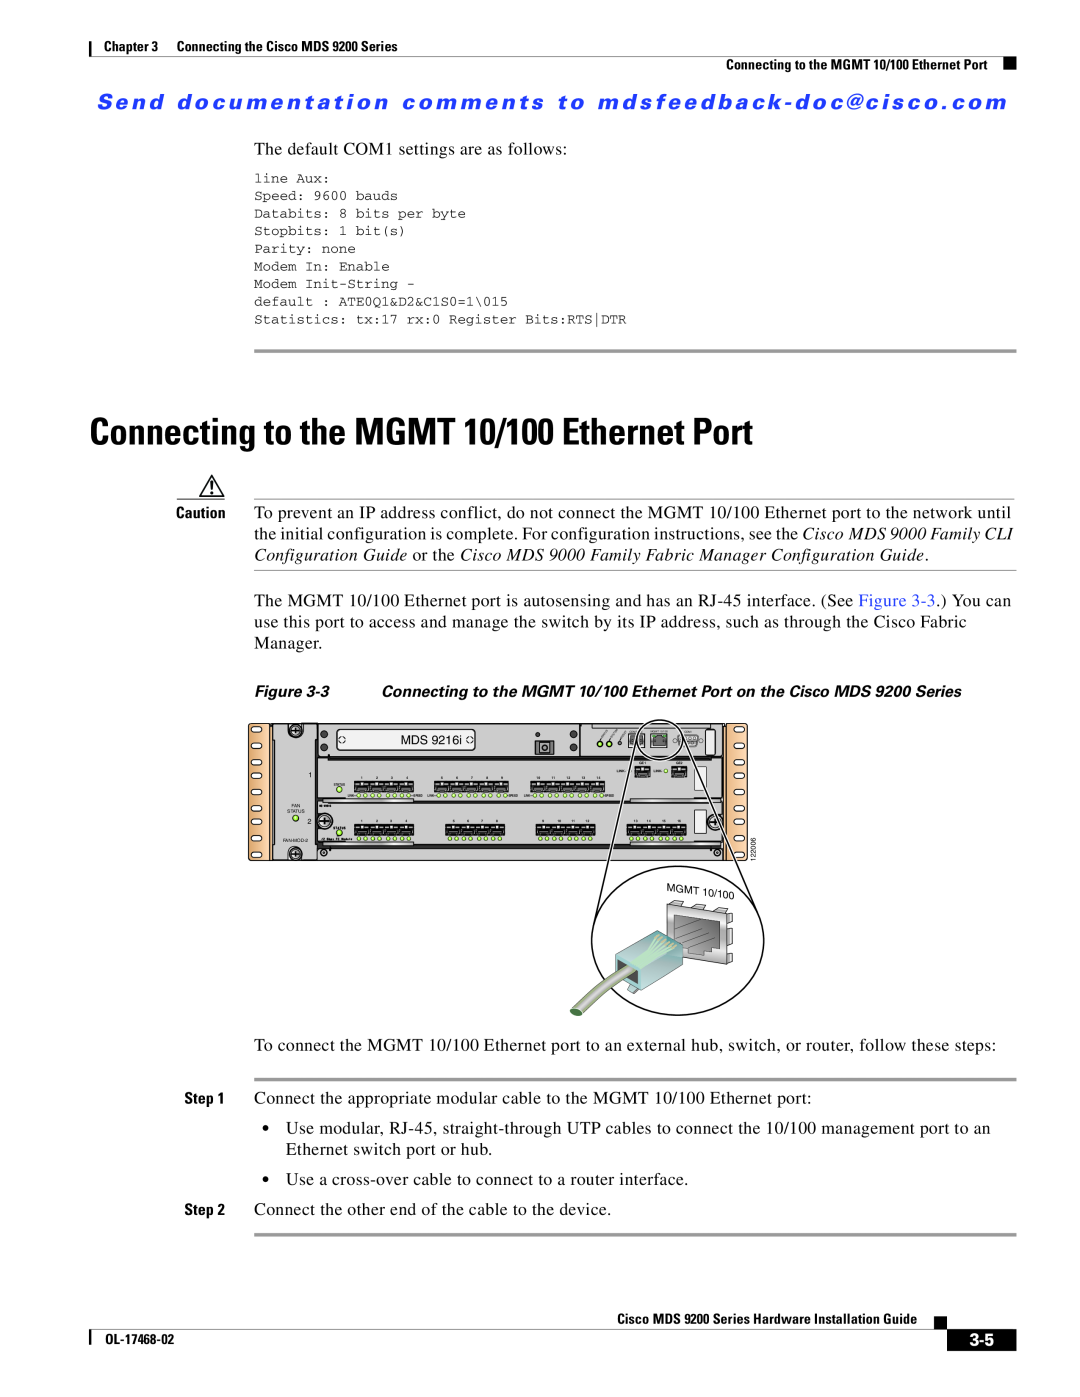 Cisco Systems MDS 9200 Series manual Connecting to the MGMT 10/100 Ethernet Port 